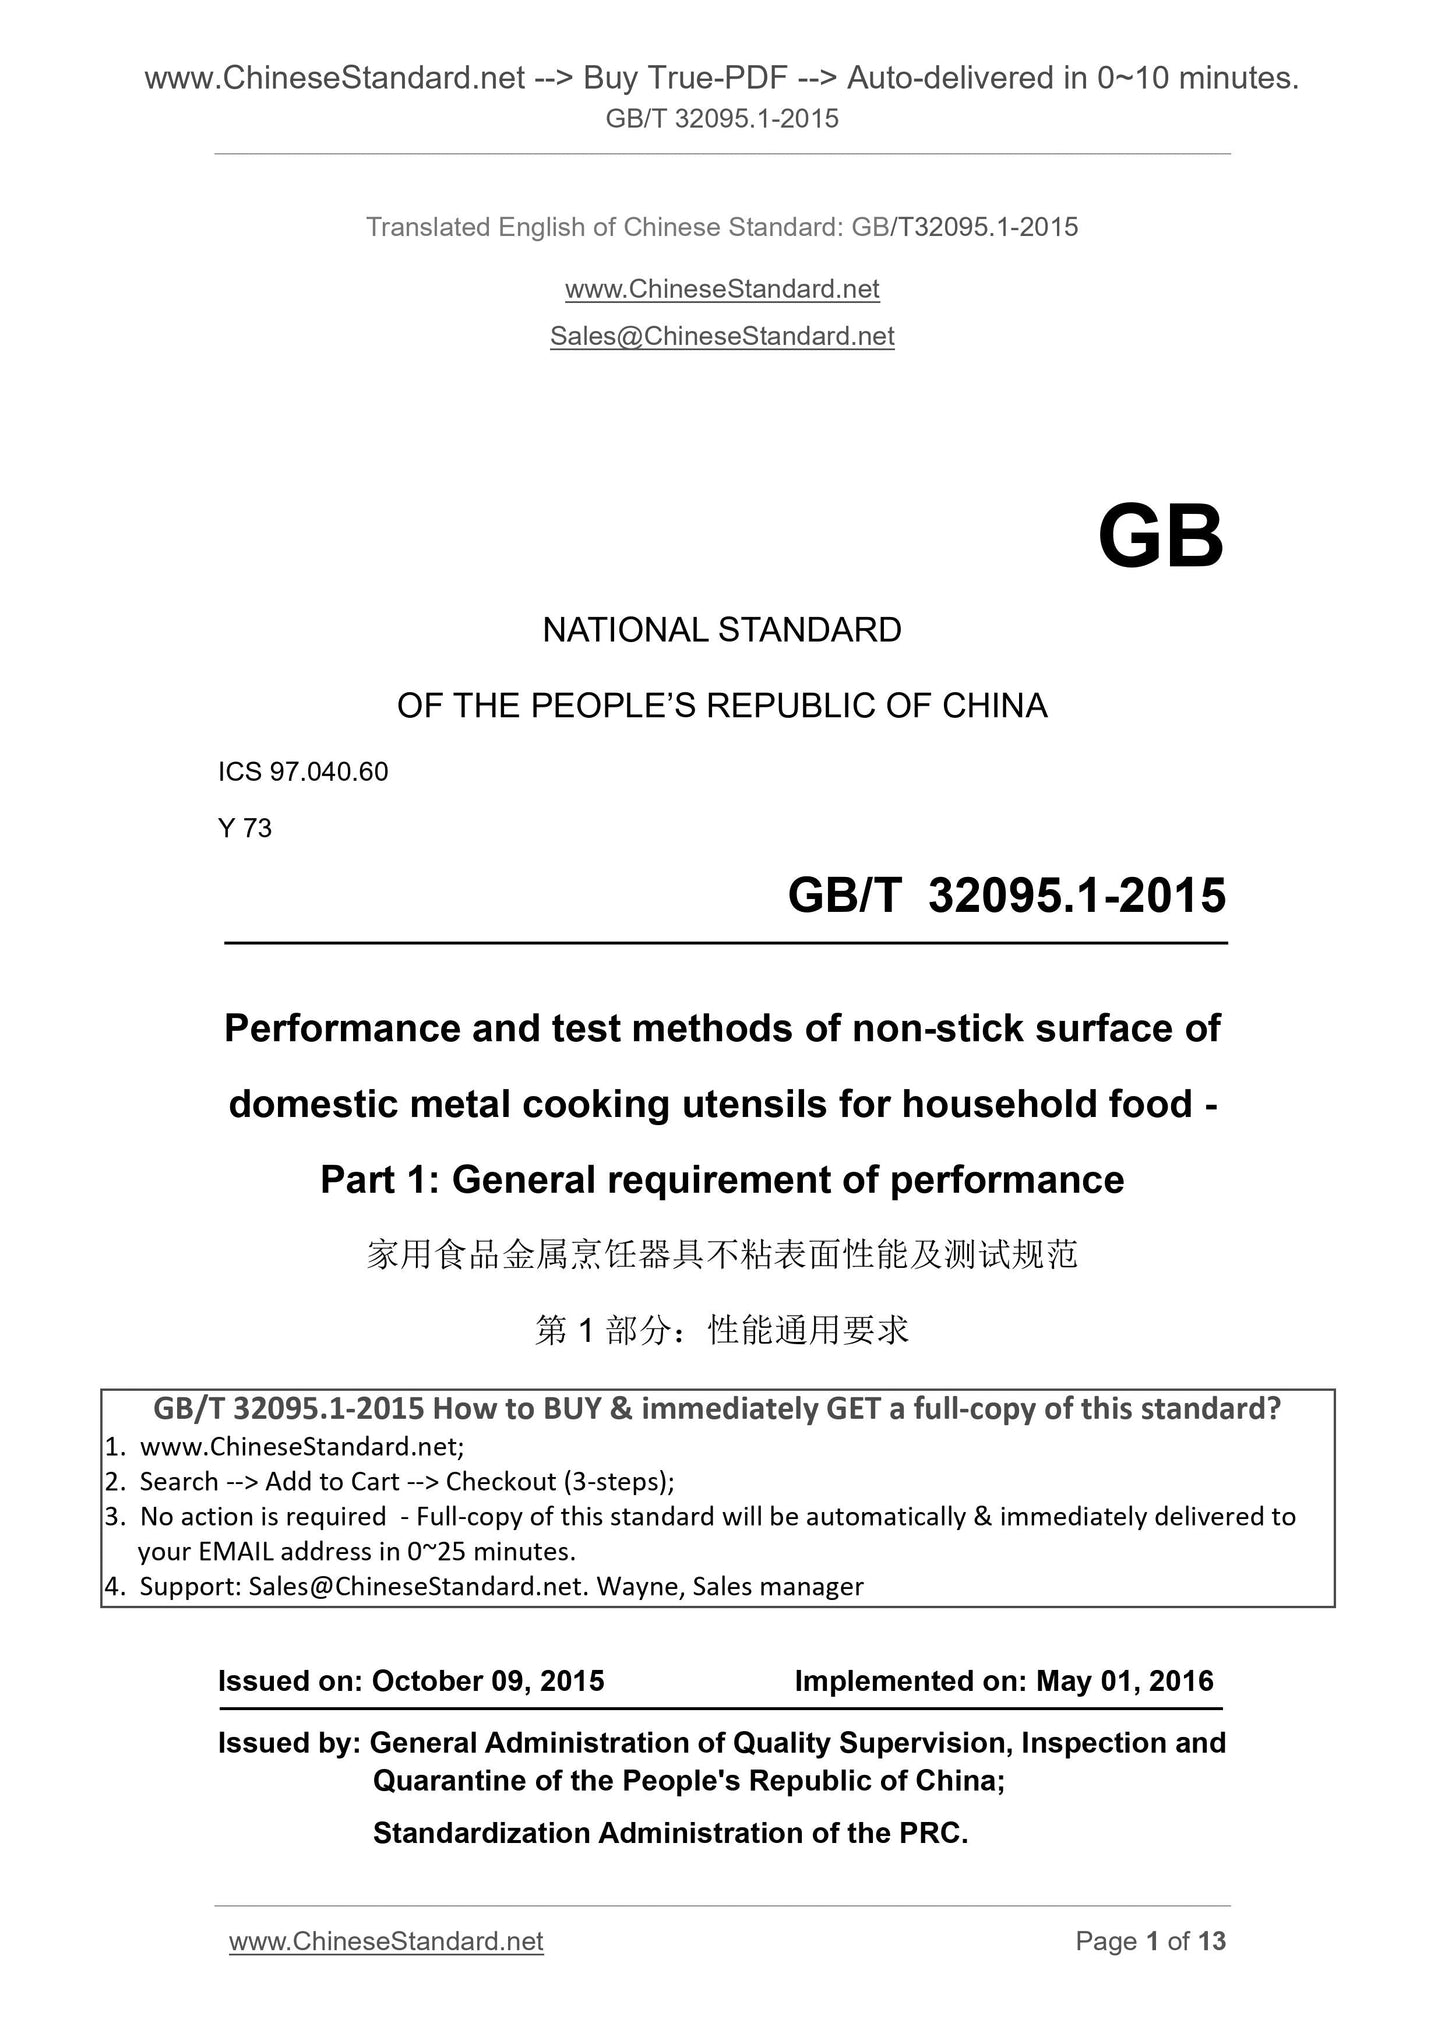 GB/T 32095.1-2015 Page 1